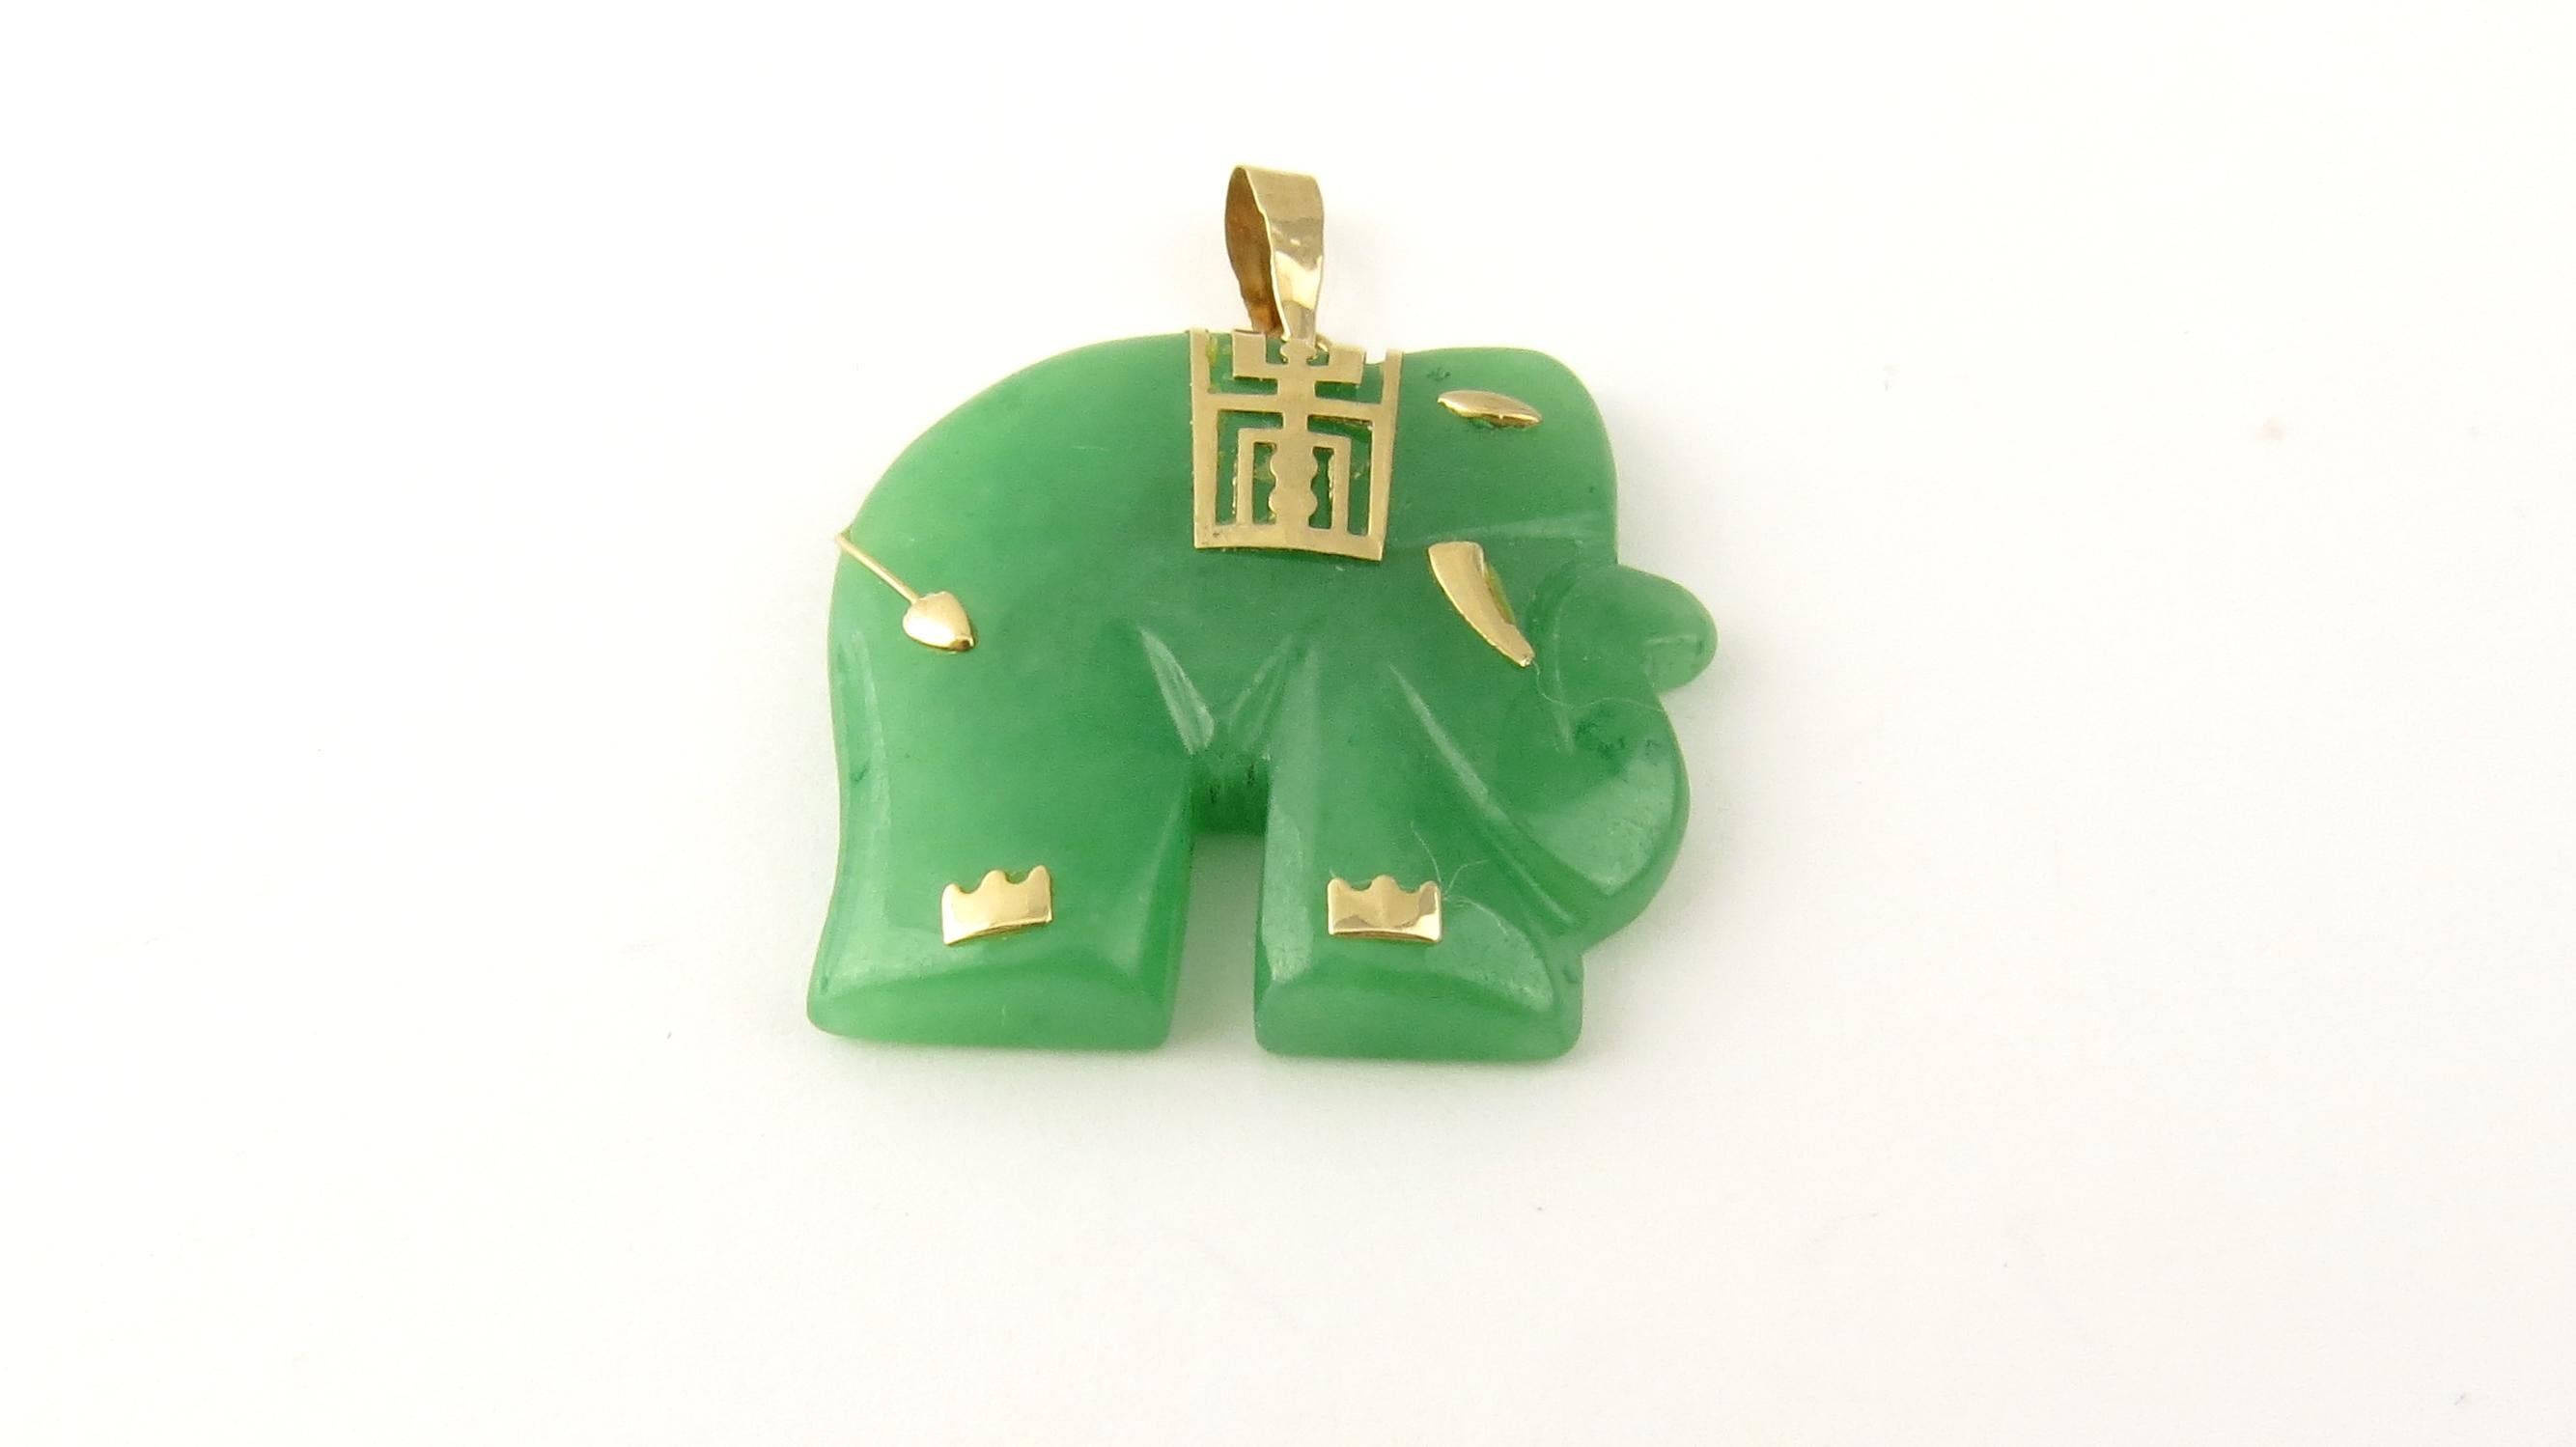 Vintage 14 Karat Yellow Gold and Jade Elephant Pendant

This lovely elephant is beautifully designed in green jade and accented with 14K yellow gold.

Size: 27 mm x 26 mm (actual pendant)

Weight: 4.0 dwt. / 6.3 gr.

Stamped: 14K

Very good